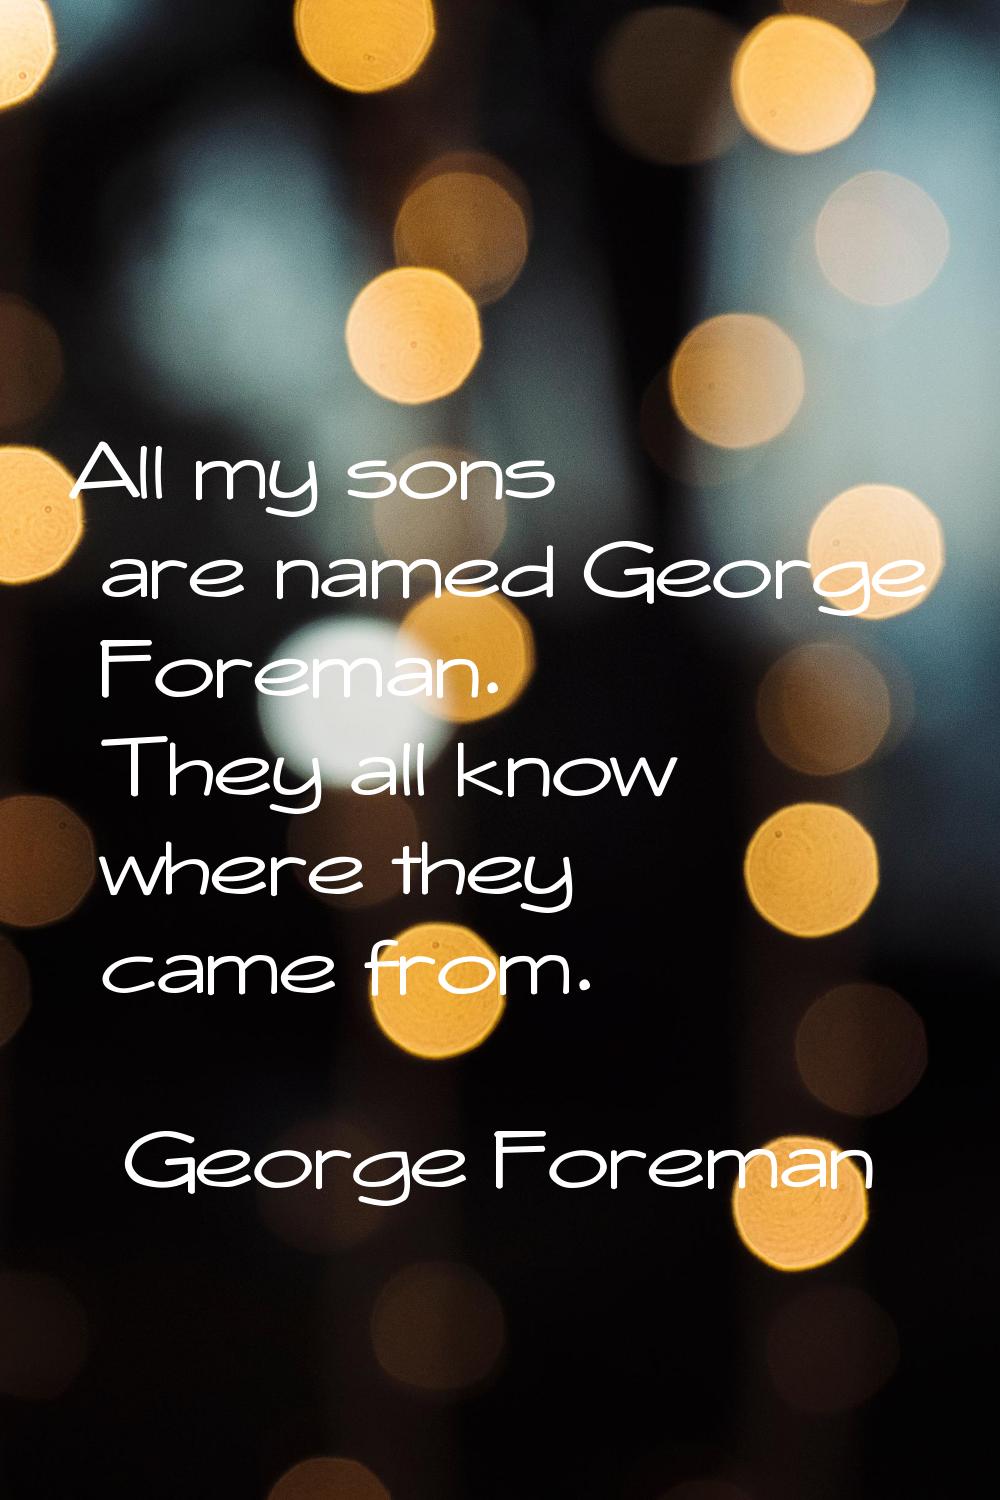 All my sons are named George Foreman. They all know where they came from.